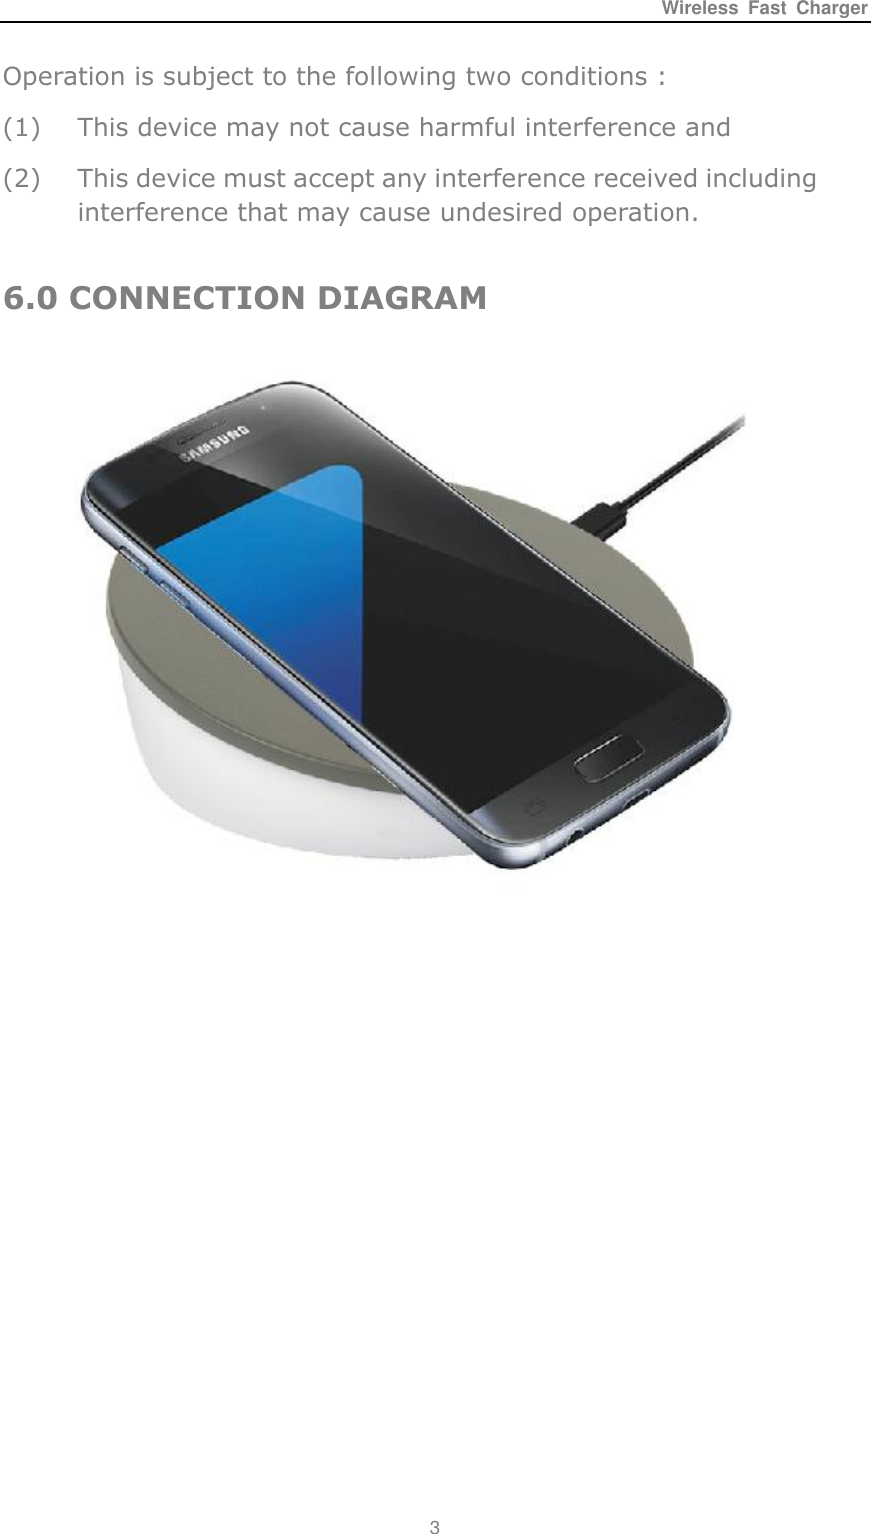 Wireless  Fast  Charger 3  Operation is subject to the following two conditions : (1) This device may not cause harmful interference and (2) This device must accept any interference received including interference that may cause undesired operation.  6.0 CONNECTION DIAGRAM         